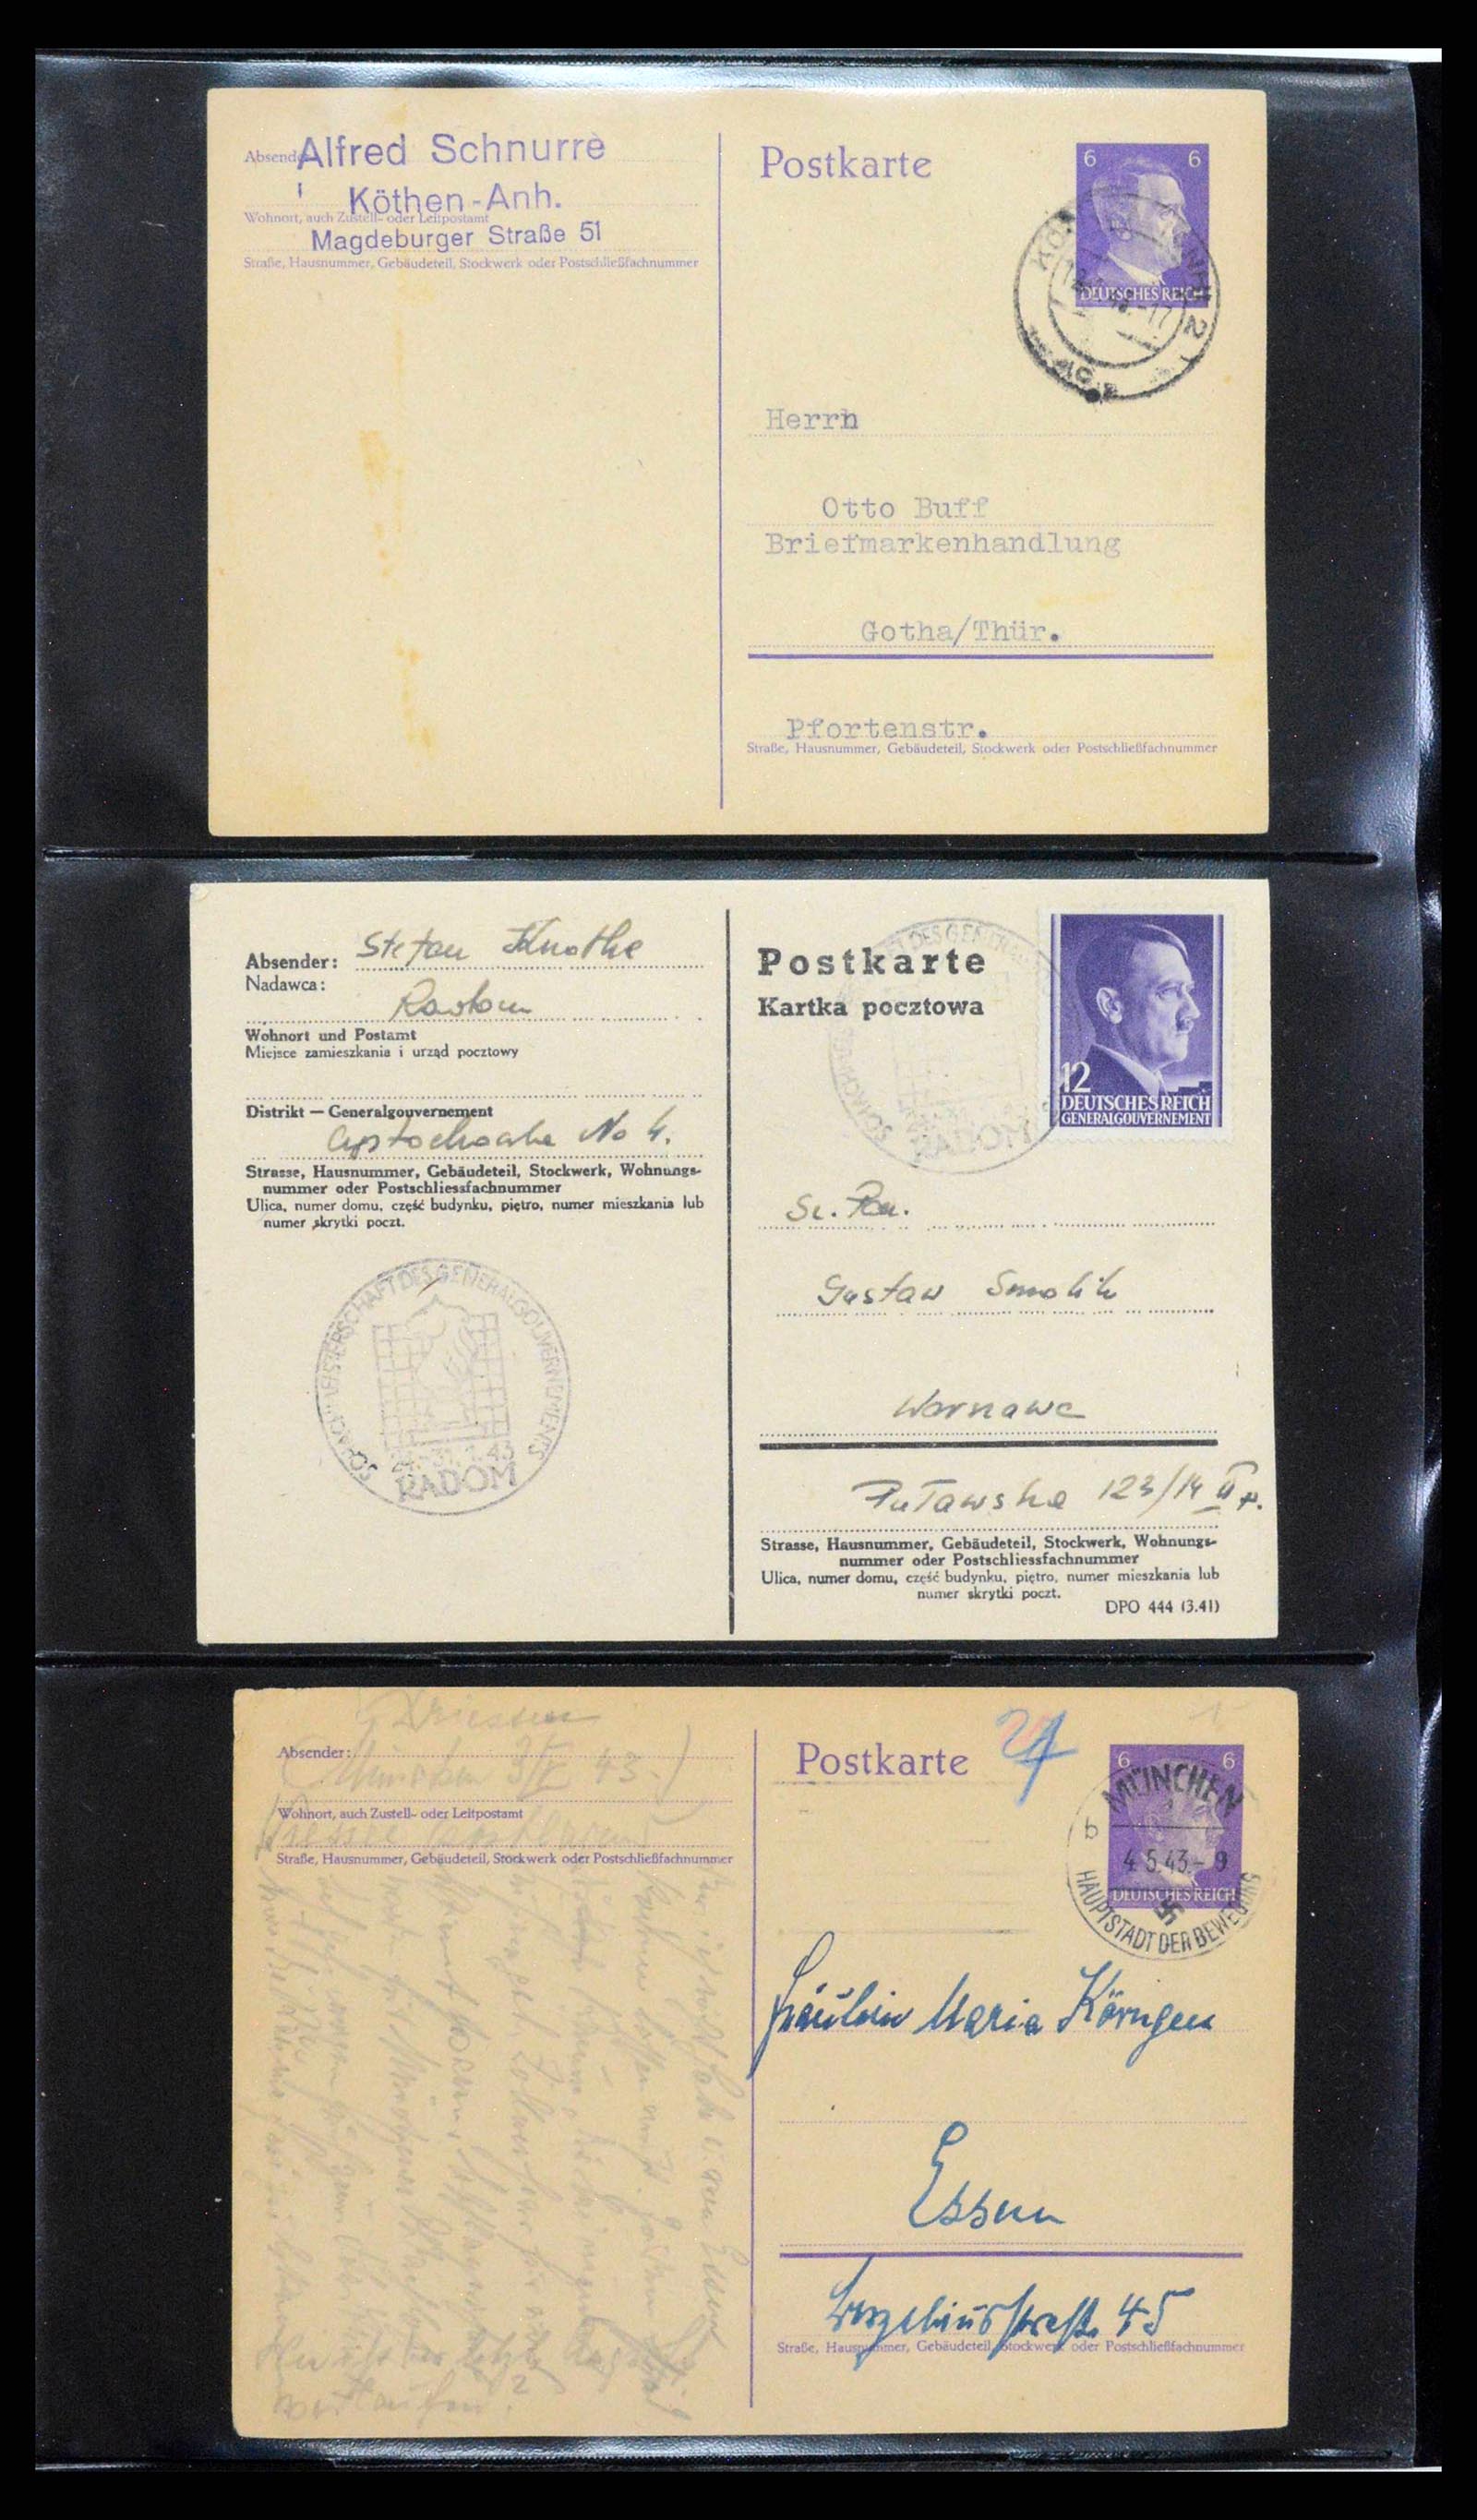 38646 0148 - Stamp collection 38646 Germany covers and cards 1940-1945.